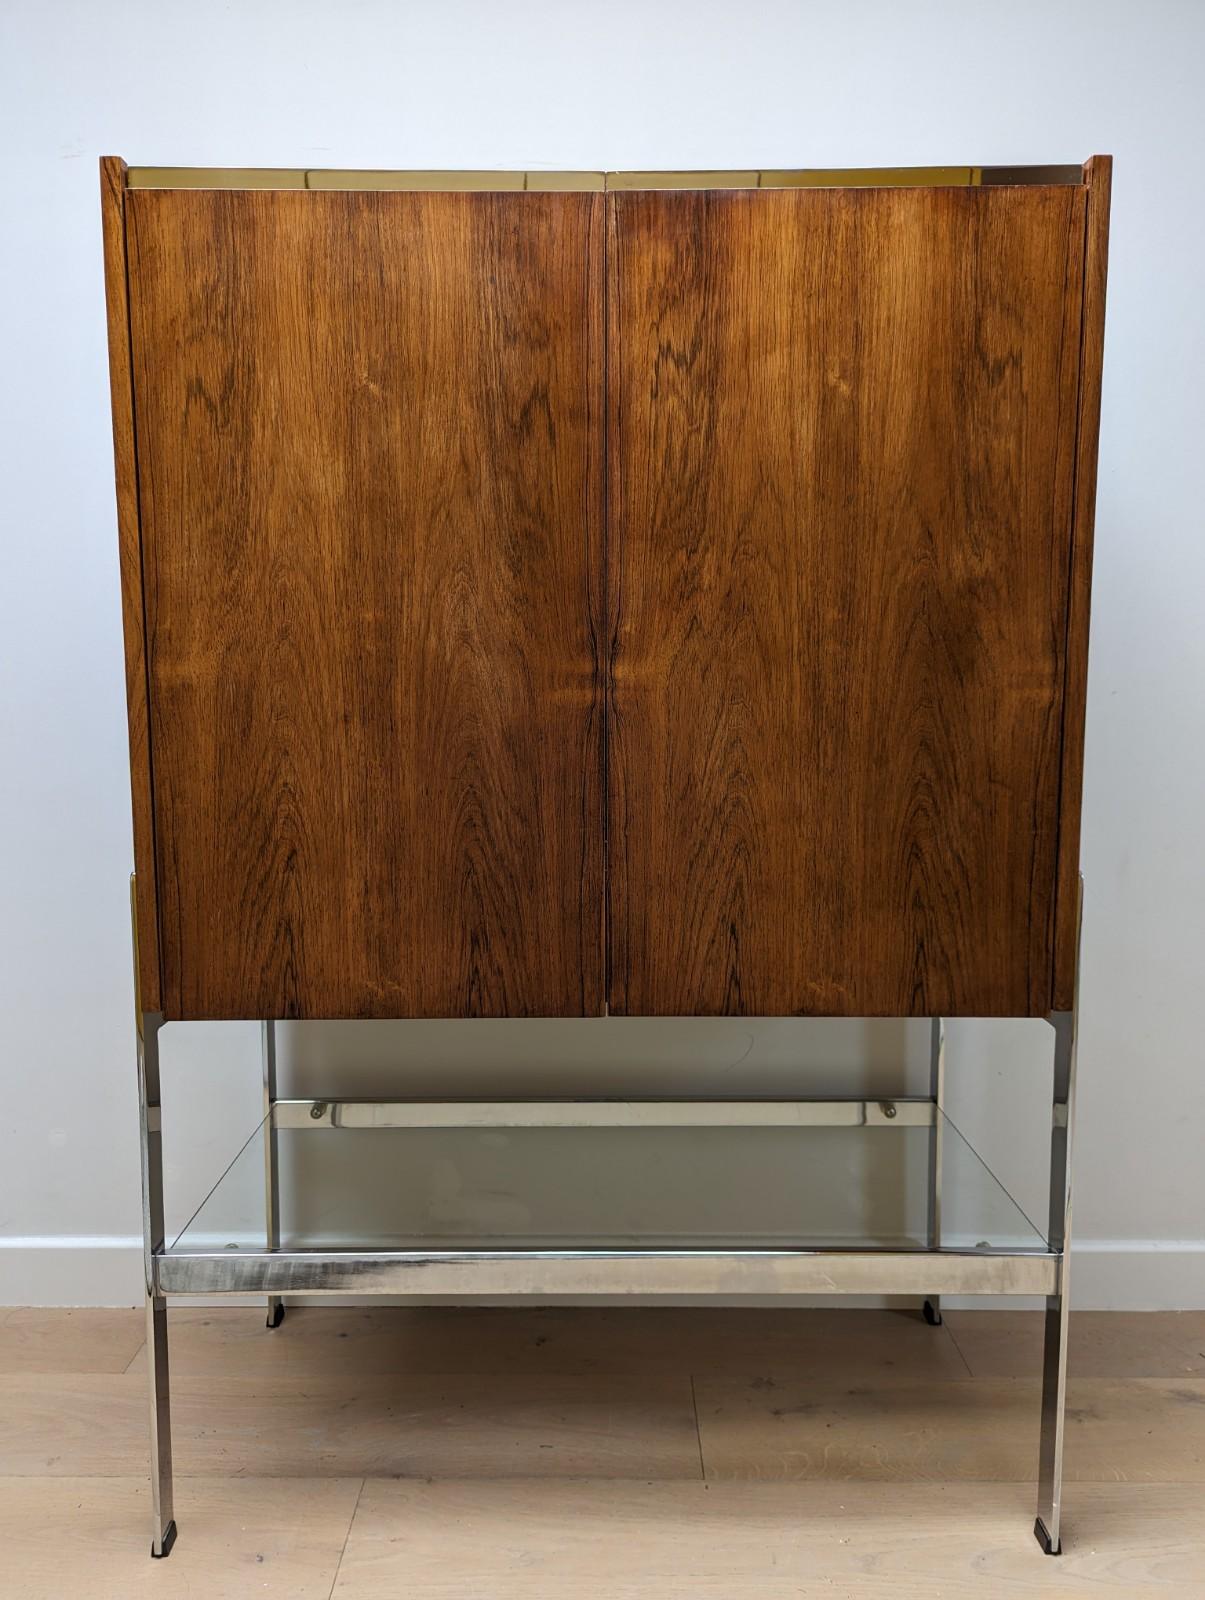 A very rare and stunning mid-century cocktail cabinet by Merrow Associates known as 'The Drummond 406R'.

The item has undergone some light restoration to ensure it is presented in very good vintage condition.

Made from Santos rosewood with